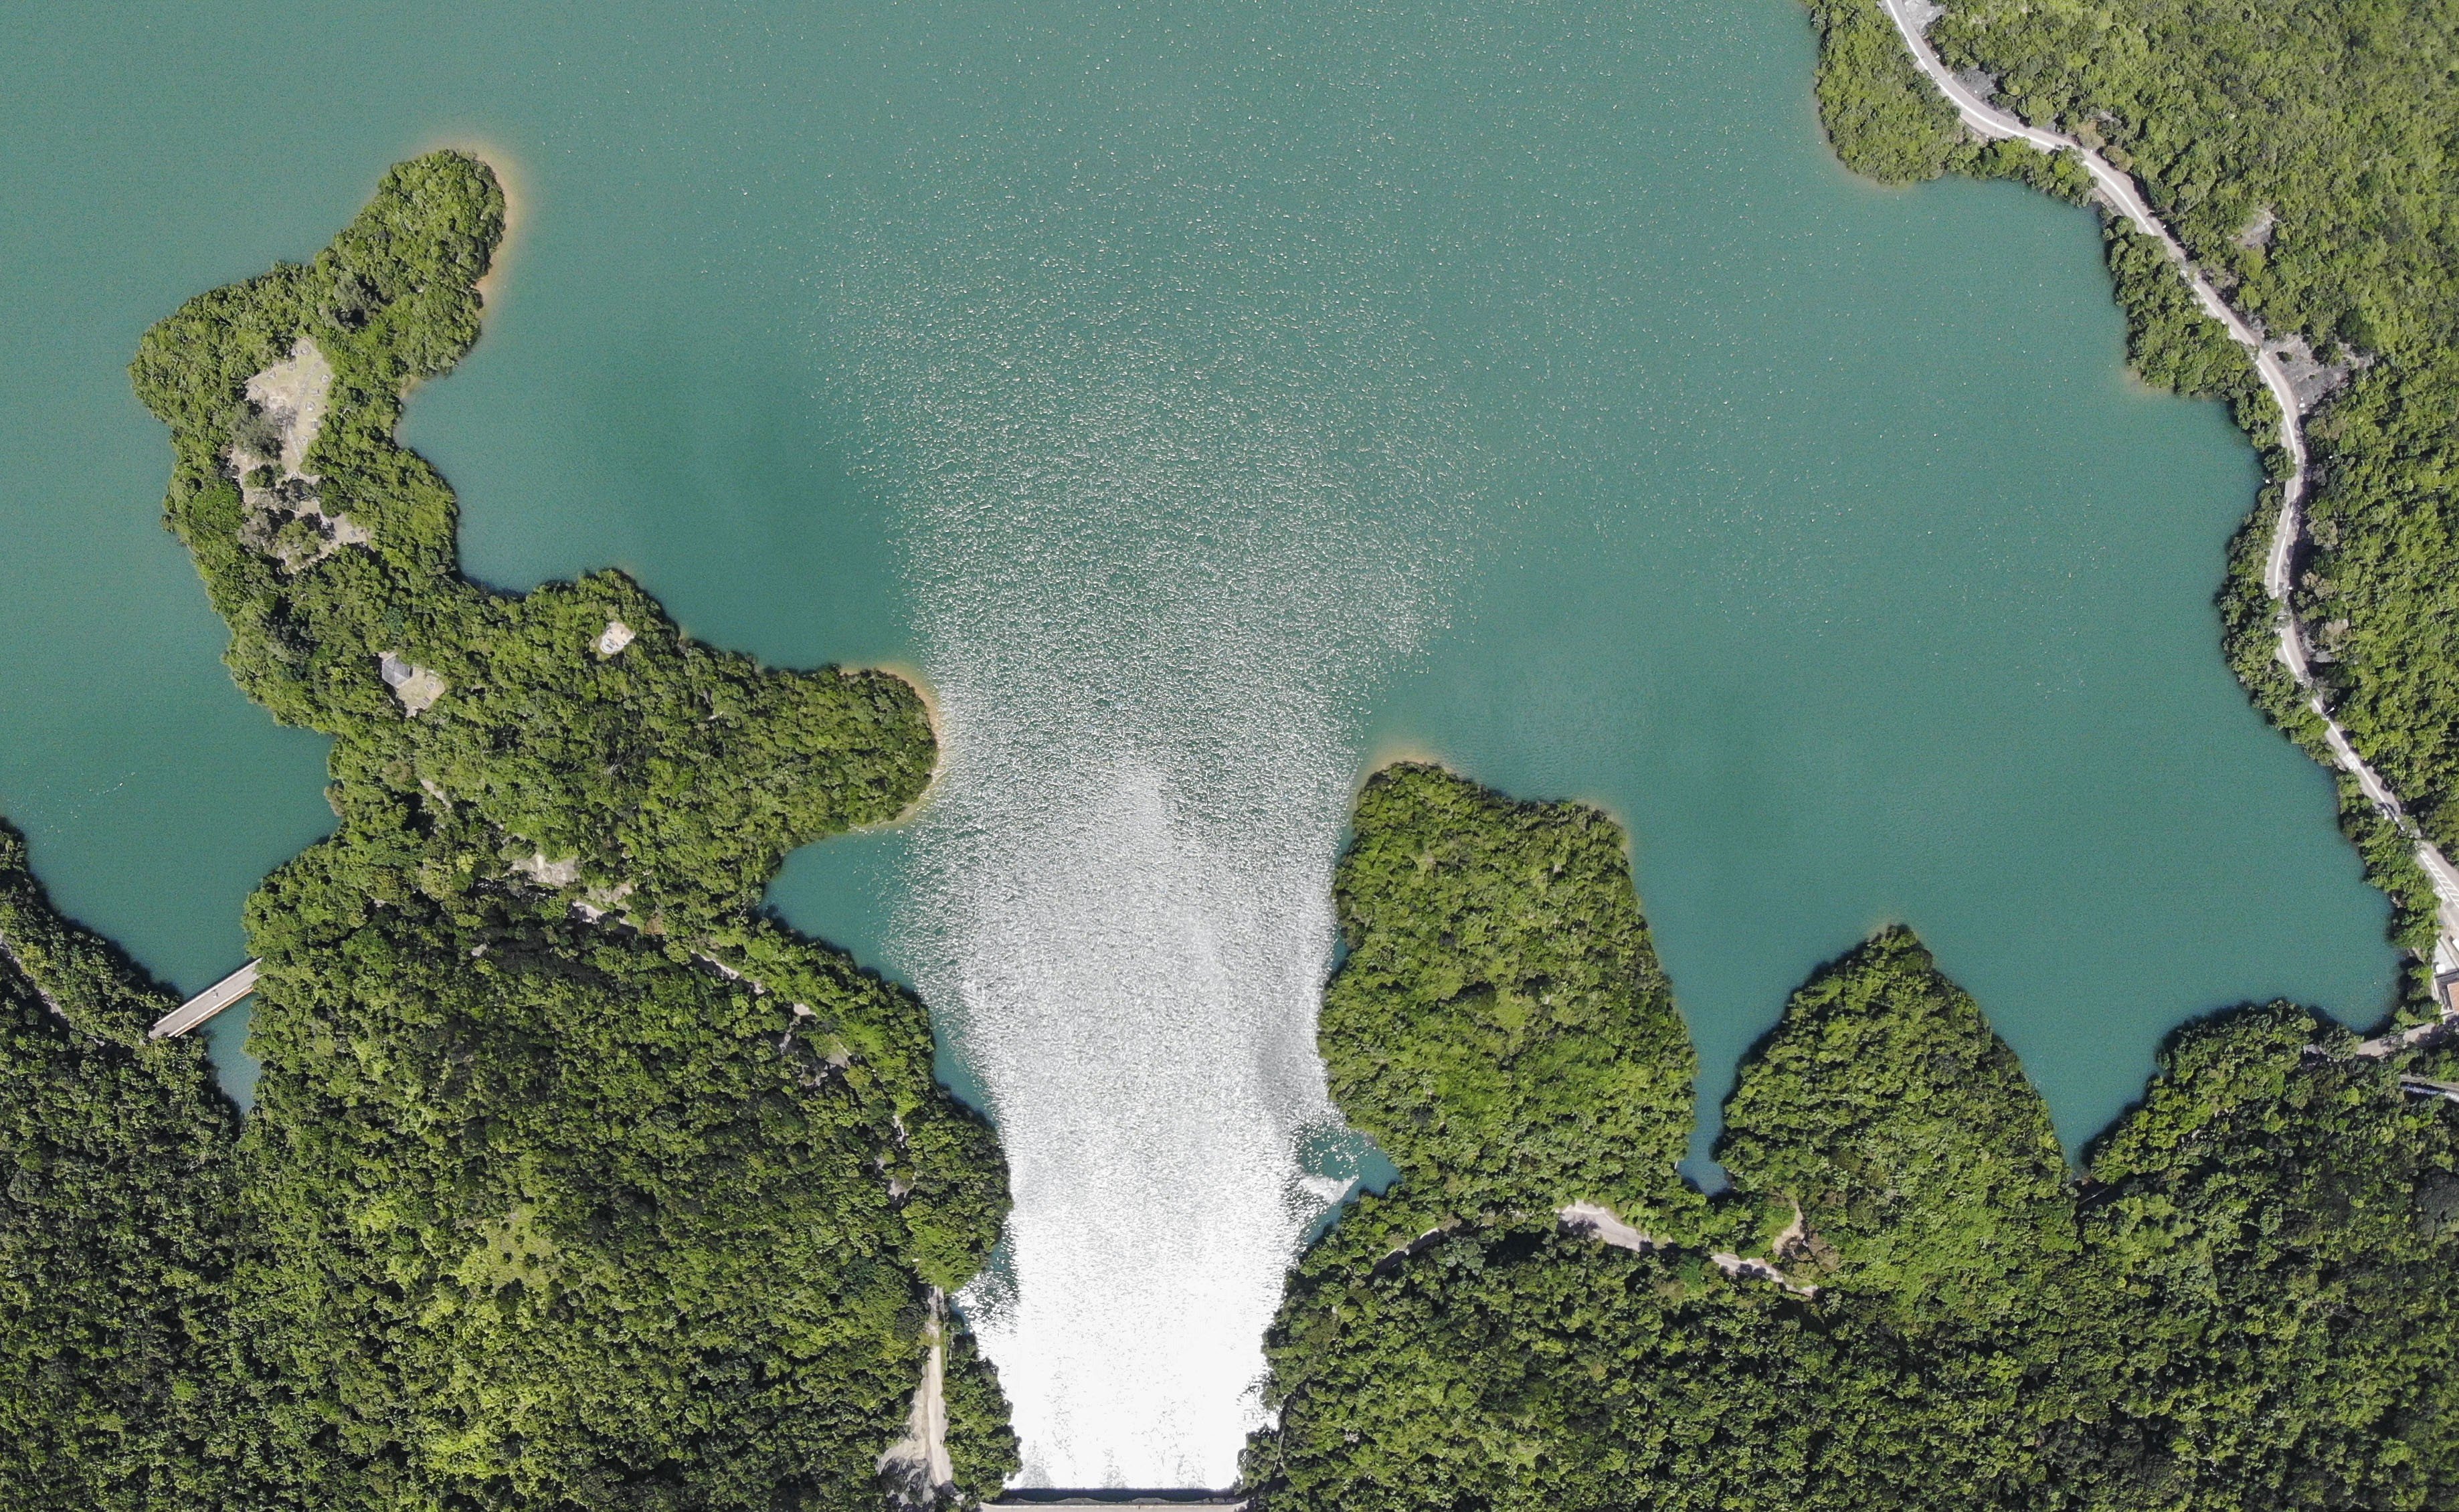 The Tai Tam Tuk Reservoir, a water resource of Hong Kong, which gets most of its supply from the mainland. Photo: Roy Issa